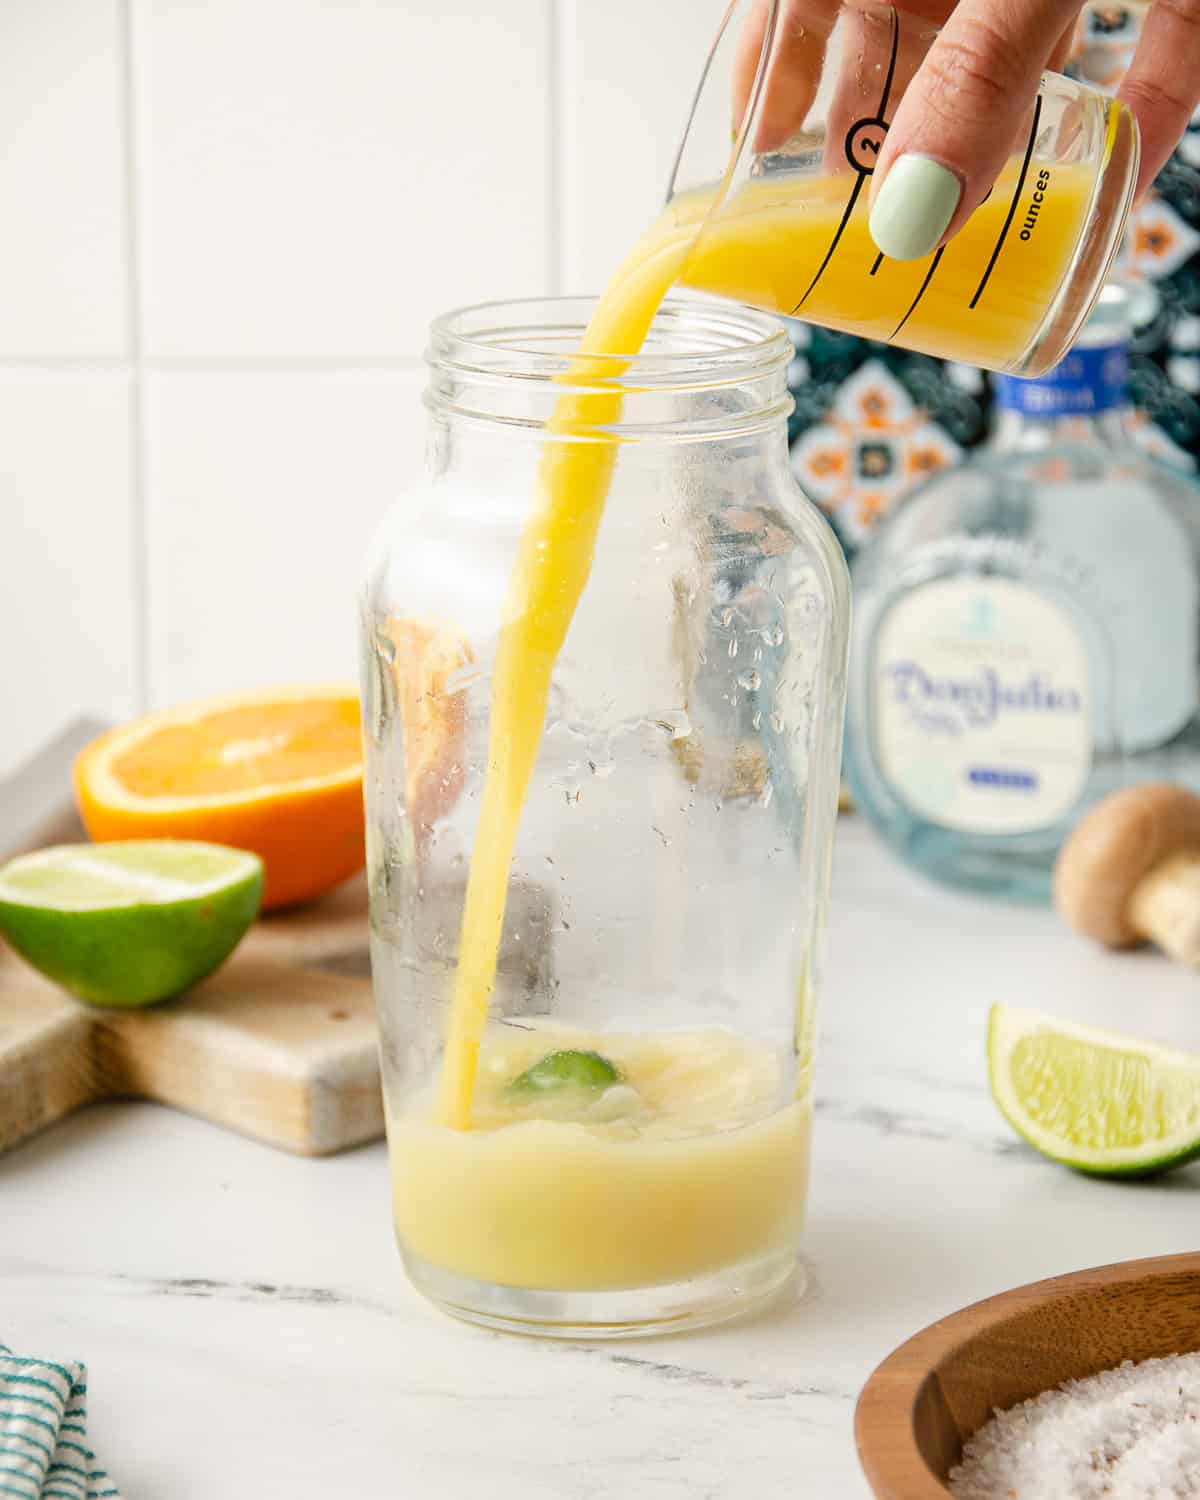 Pouring orange juice into a cocktail shaker.